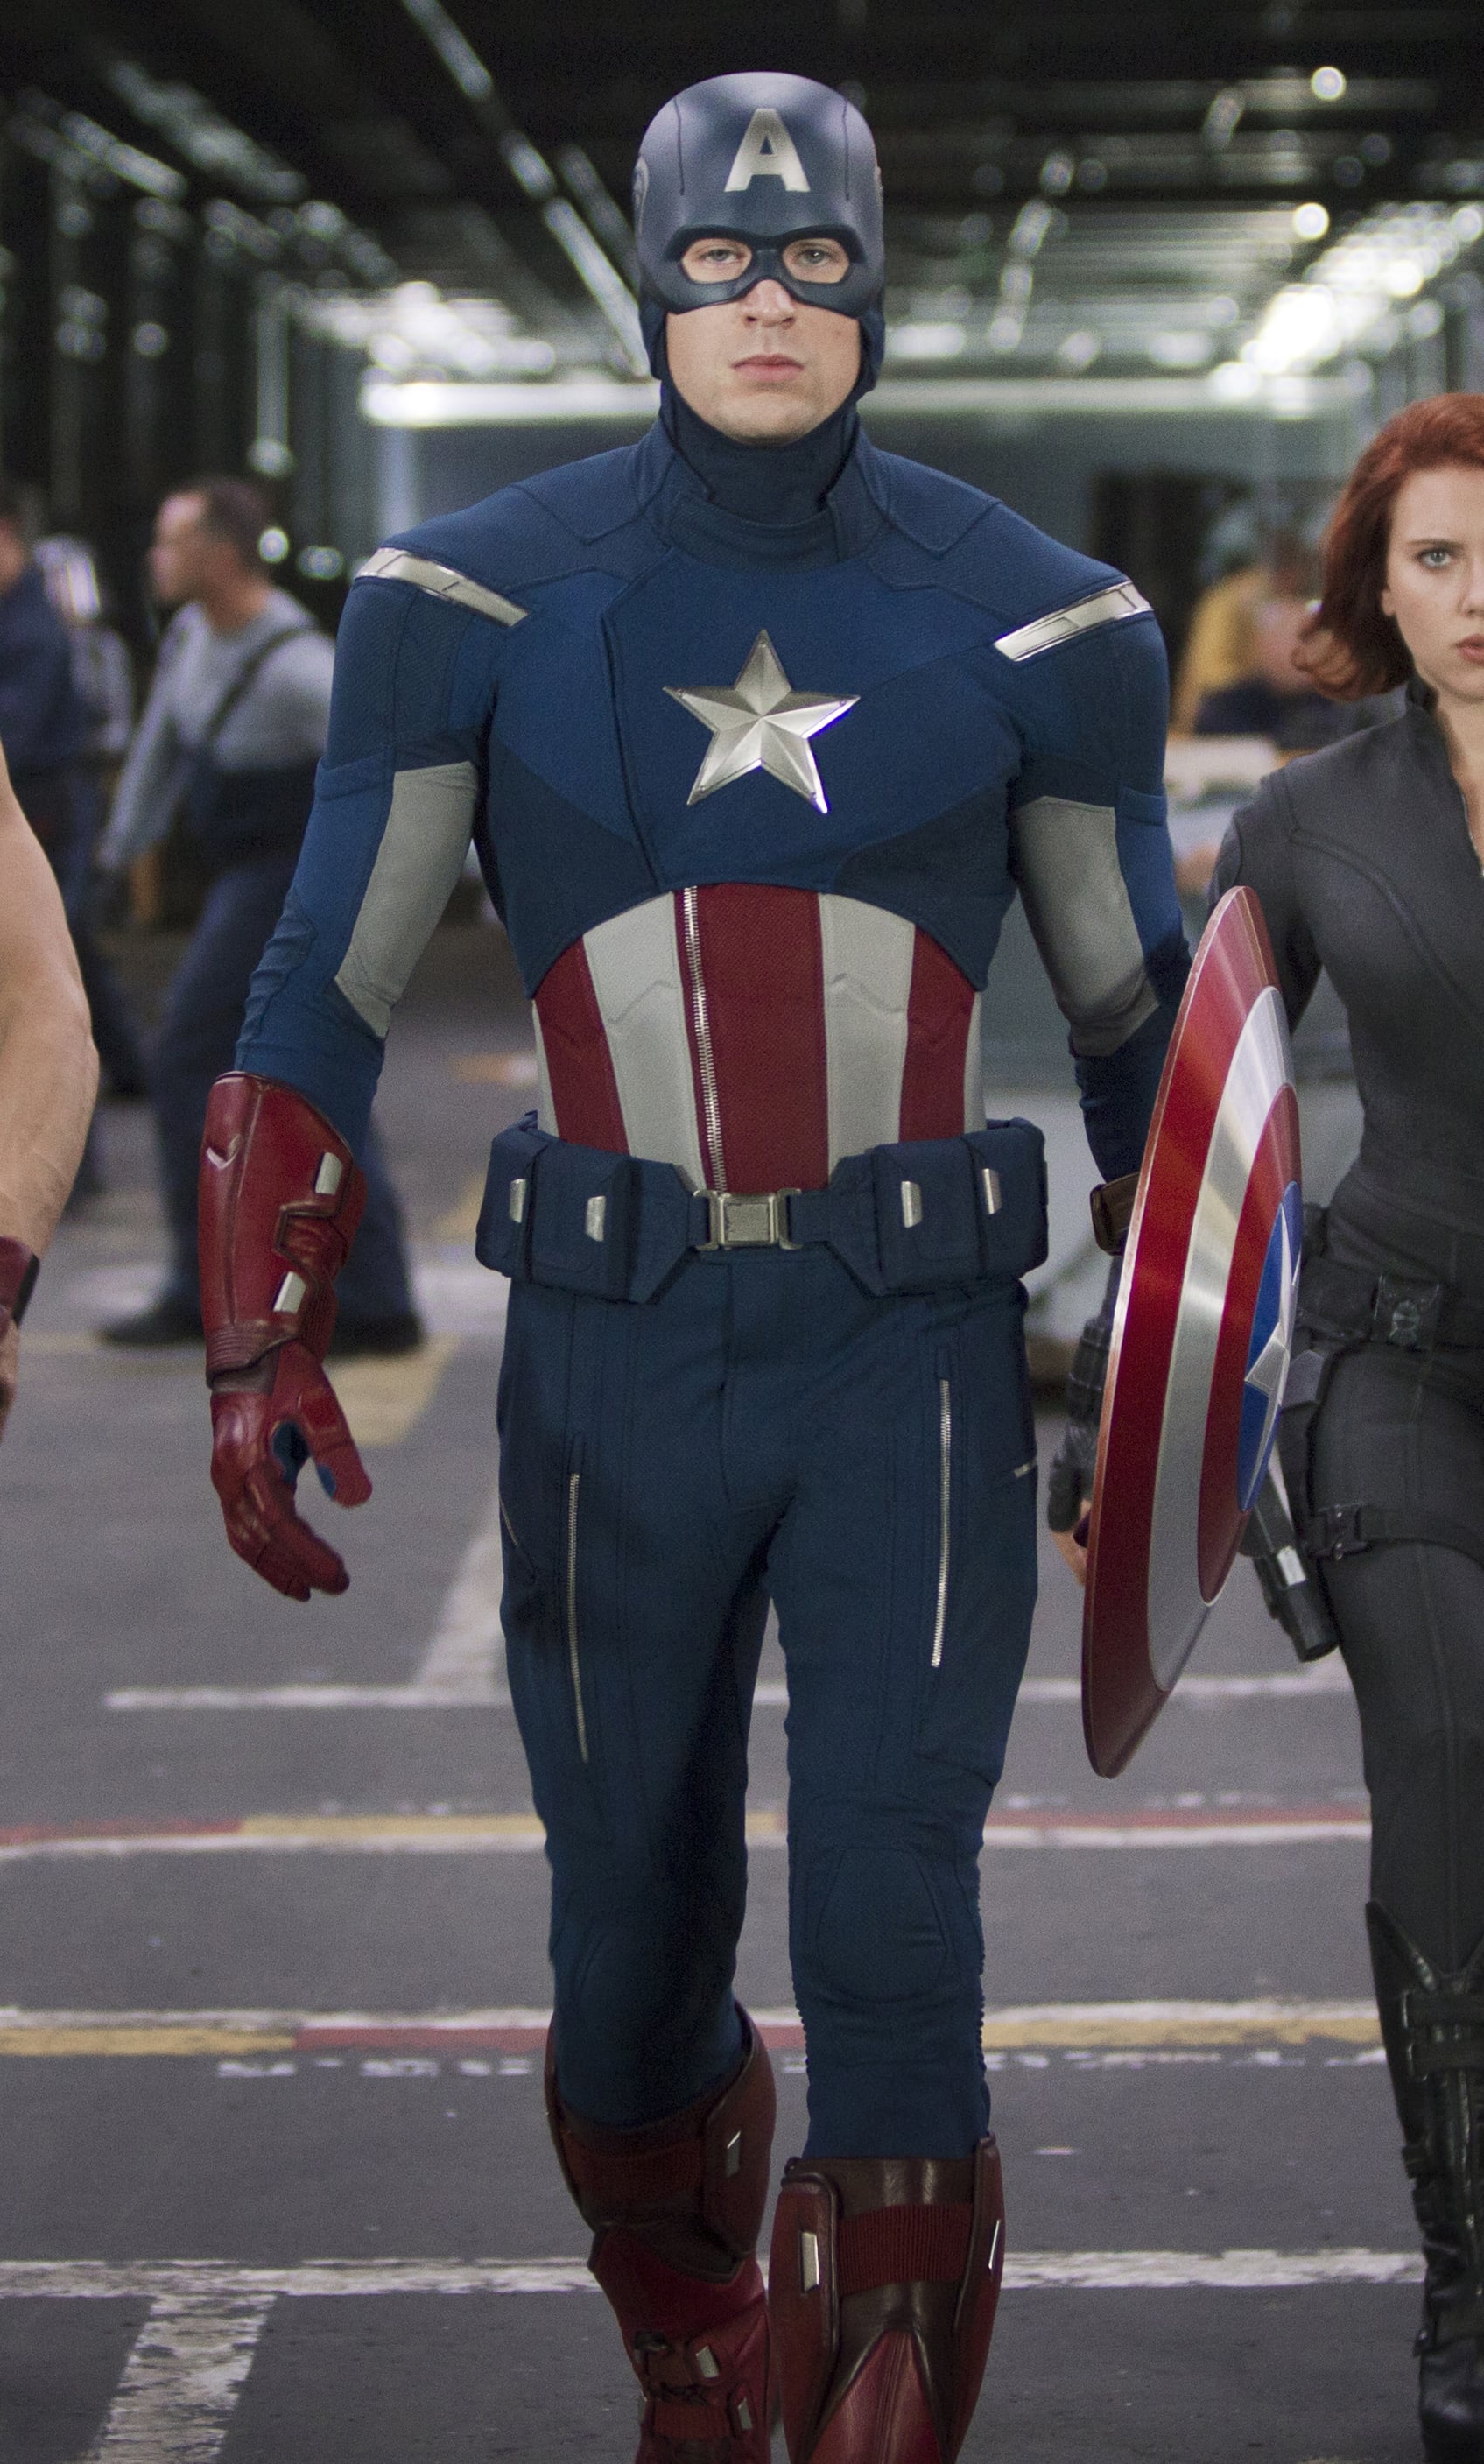 Captain America From The Avengers | 500+ Pop Culture Halloween Costume  Ideas That Will Make 2019 the Best Halloween Yet | POPSUGAR Entertainment  Photo 496